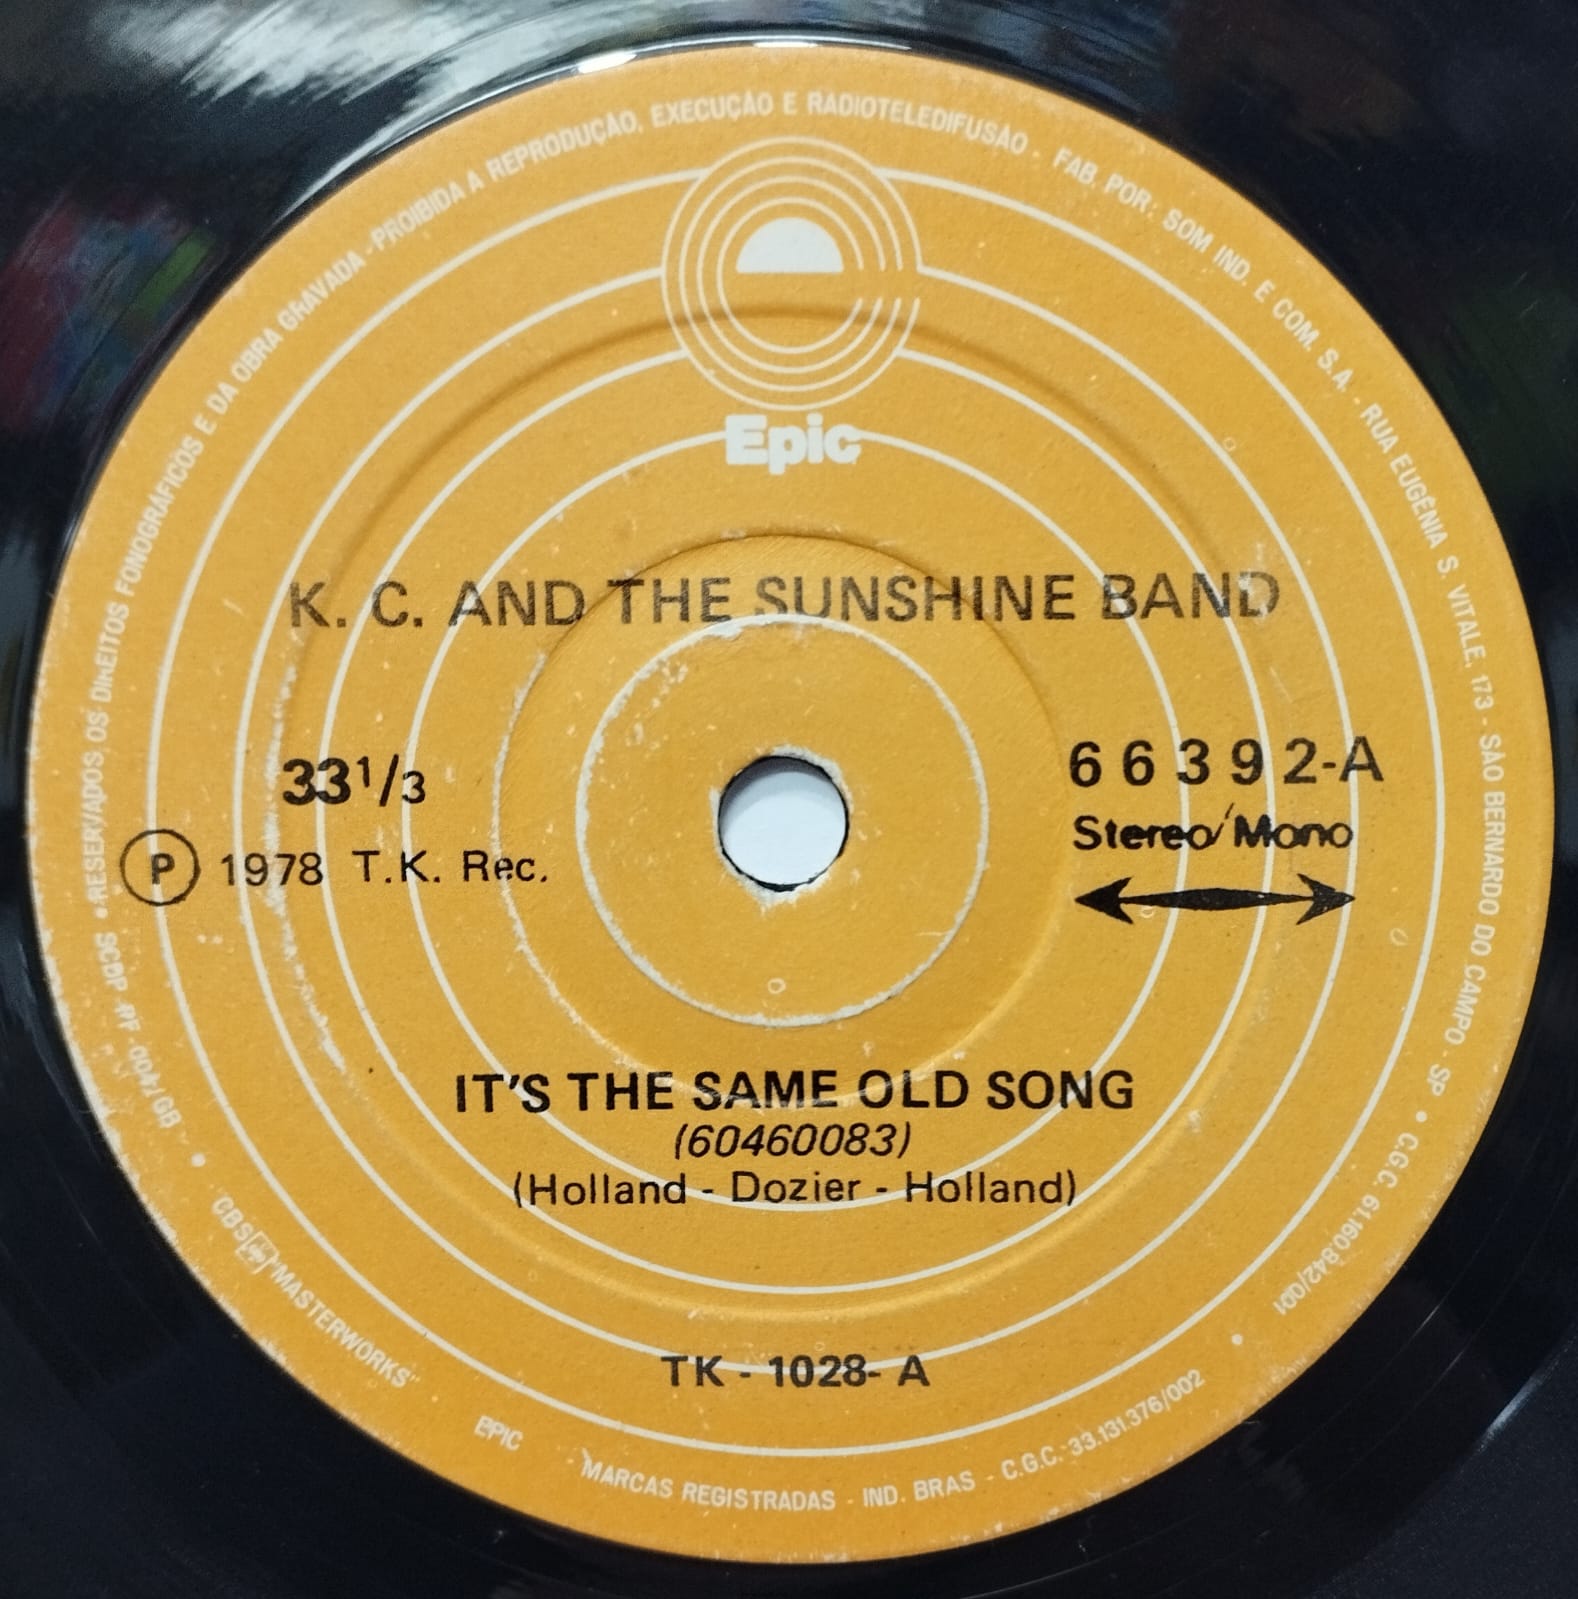 K.C. and The Sunshine Band - It's The Same Old Song (Compacto)